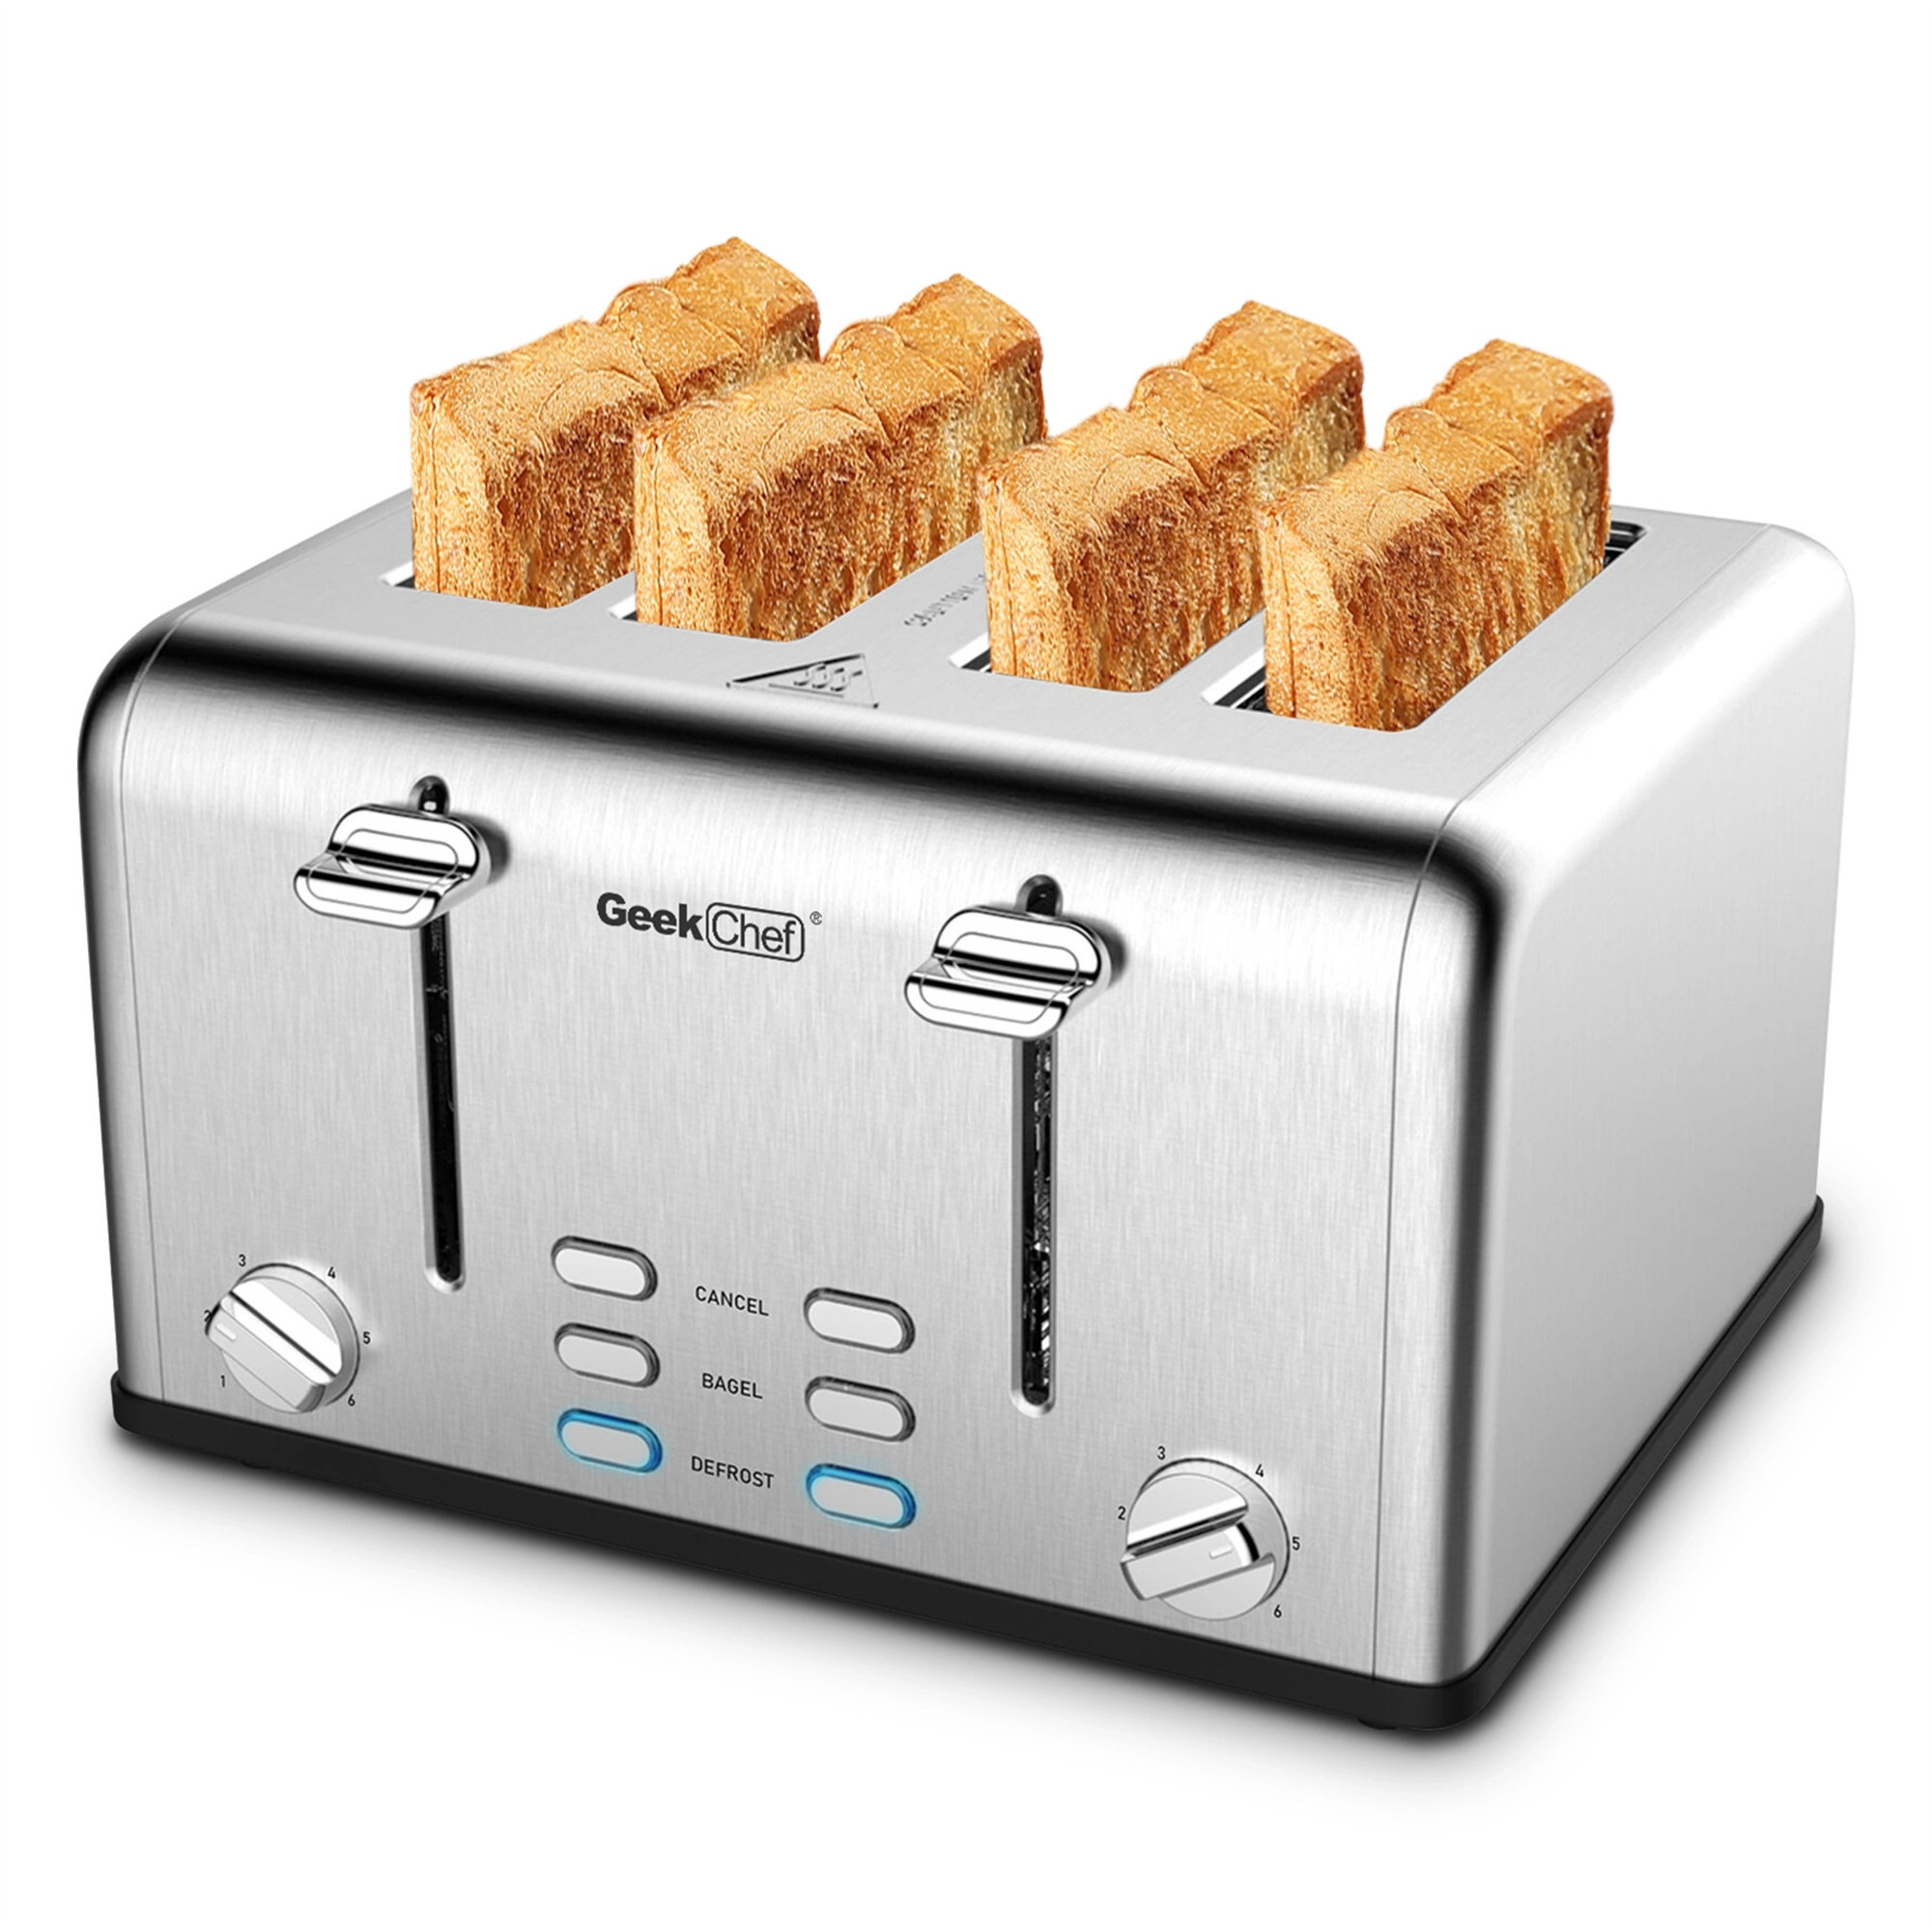 4 Slice Toaster, 4 Extra Wide Slots, Best Rated Prime Retro Bagel Toaster with 6 Bread Shade Settings, Defrost,bagel,cancel Function, Removable Crumb